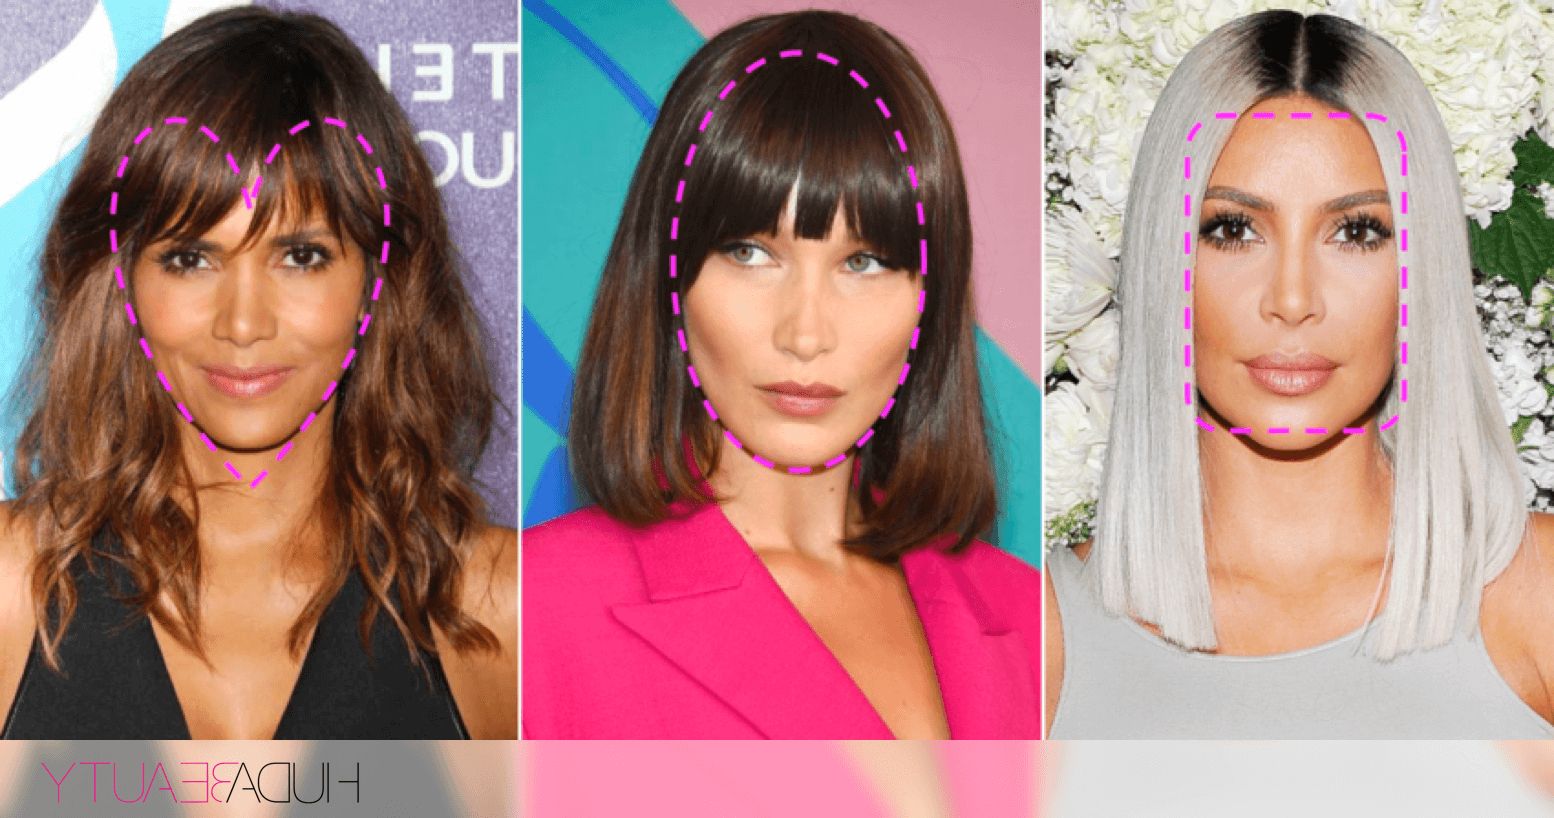 The Best Hairstyles To Flatter Your Face Shape Intended For Well Known Sharp And Blunt Bob Hairstyles With Bangs (View 20 of 20)